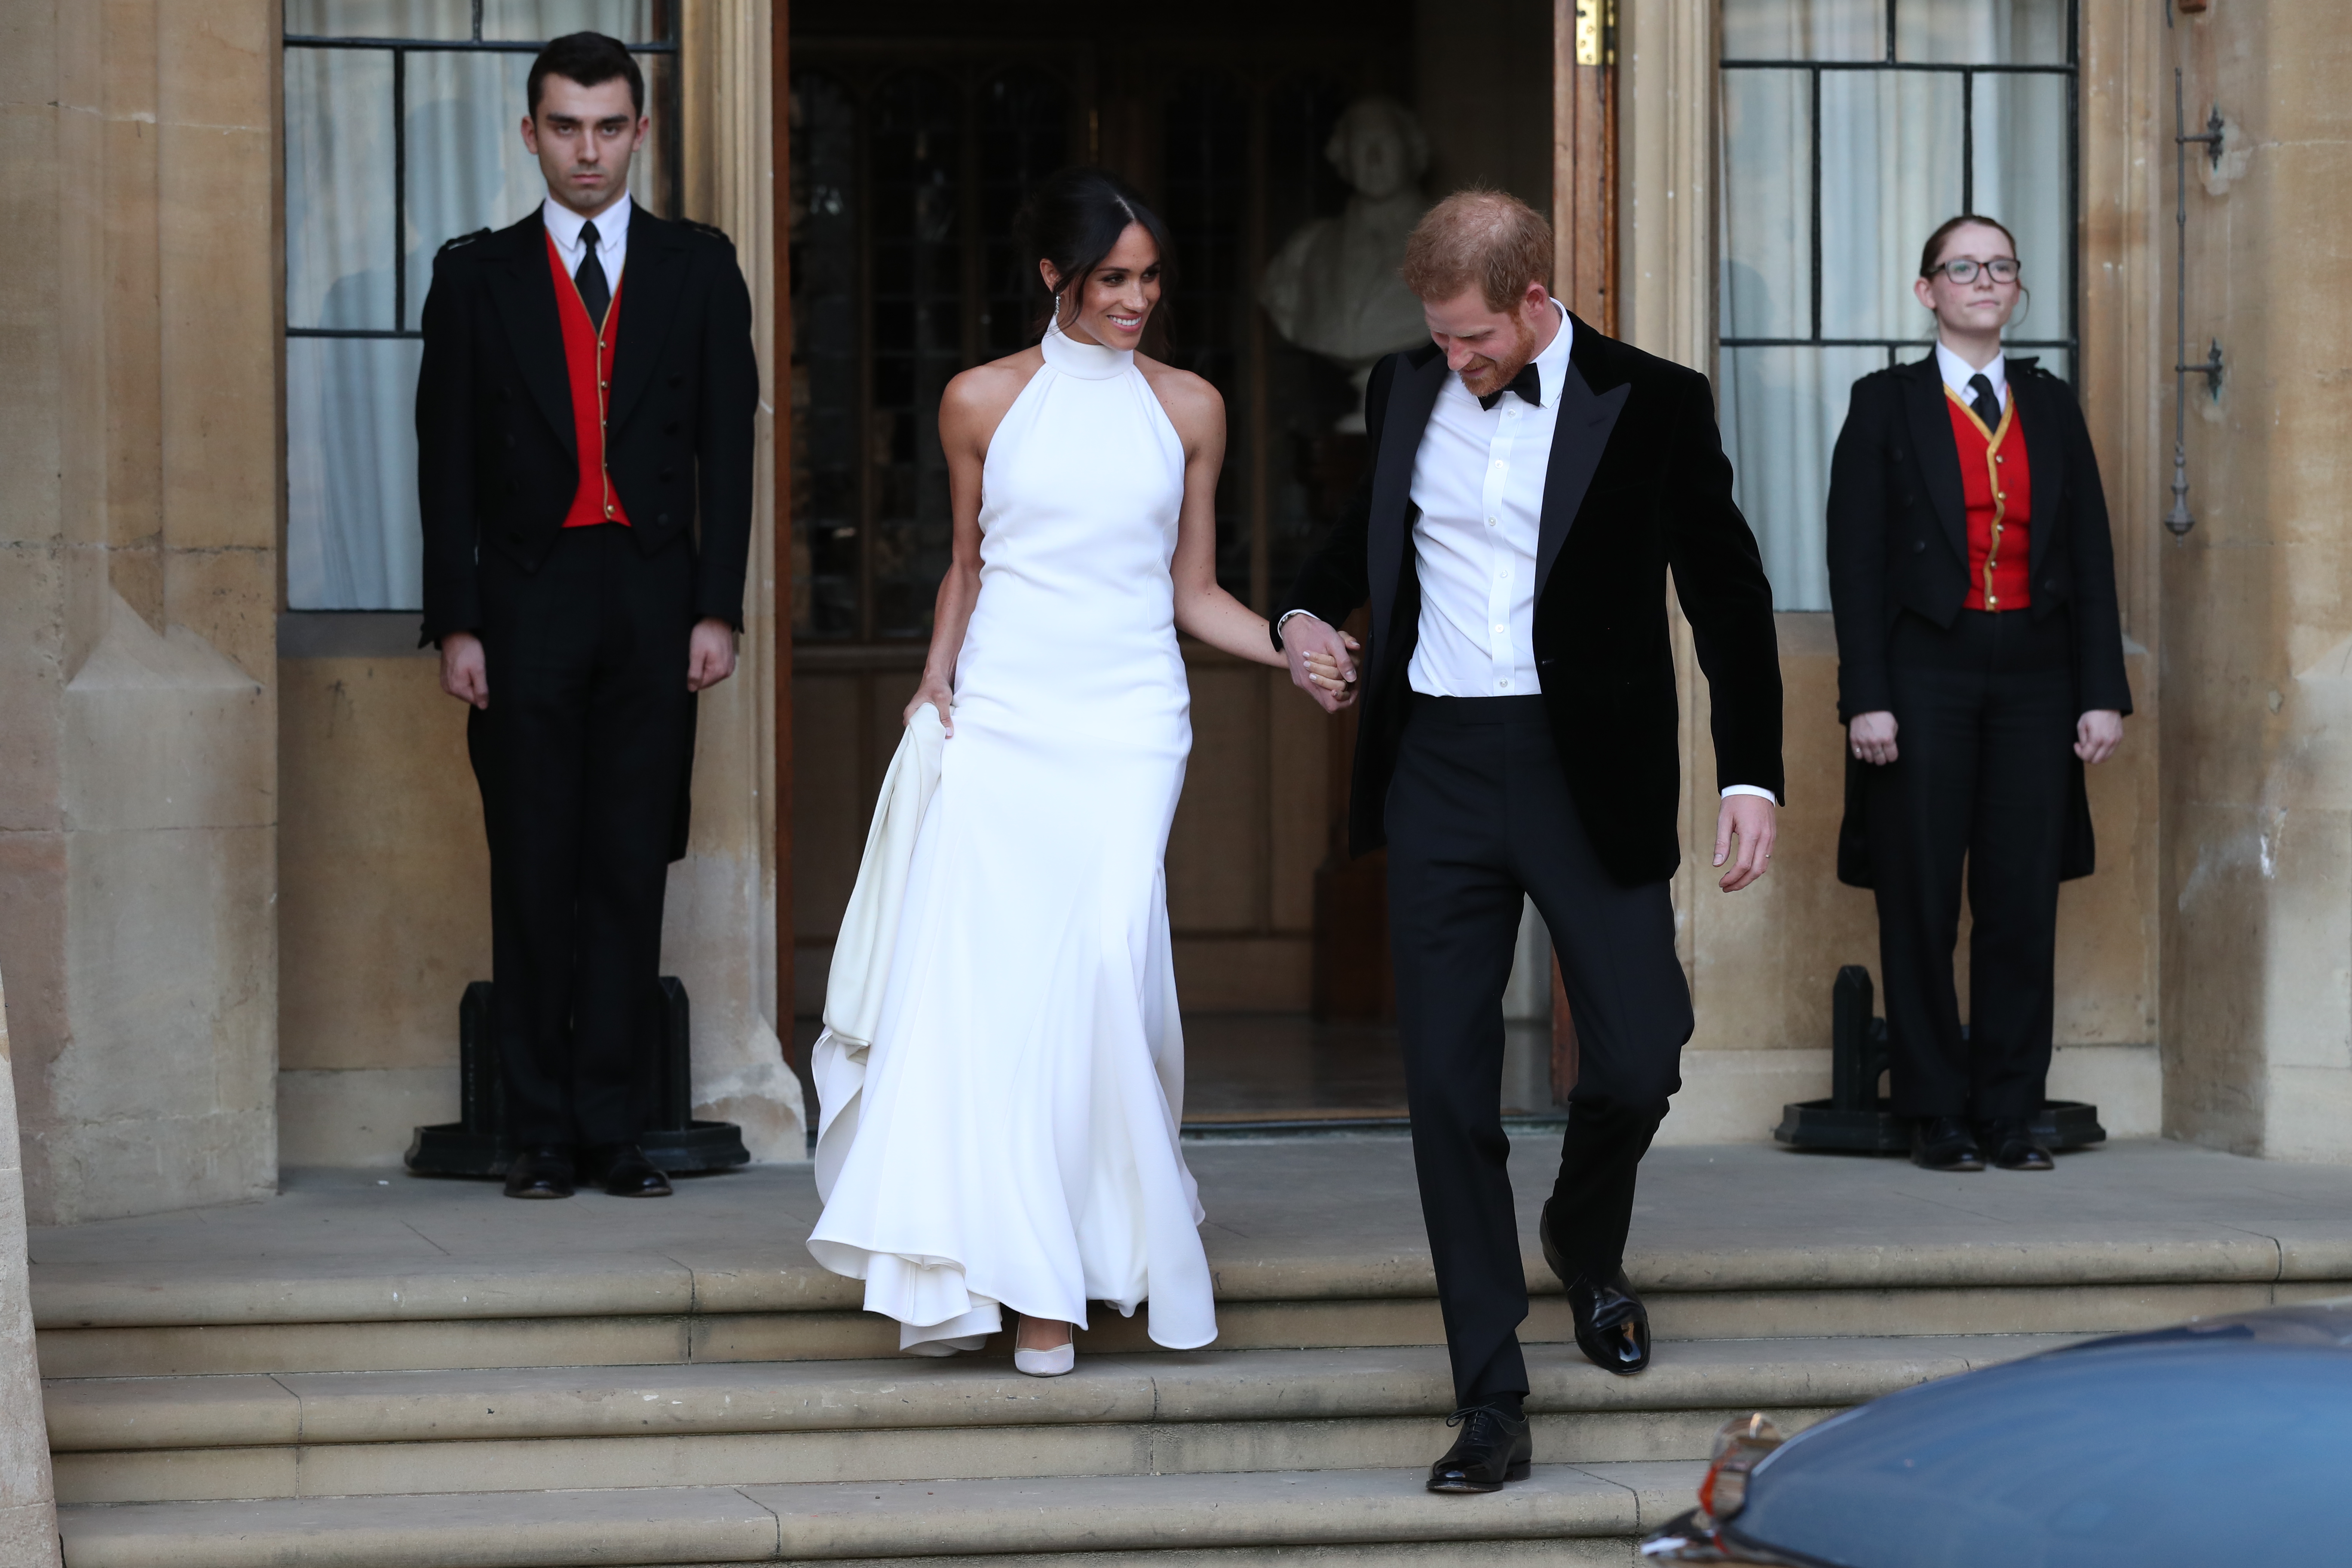 Meghan Markle and Prince Harry leave Windsor Castle for an evening reception at Frogmore House in Windsor, England, on May 19, 2018. | Source: Getty Images